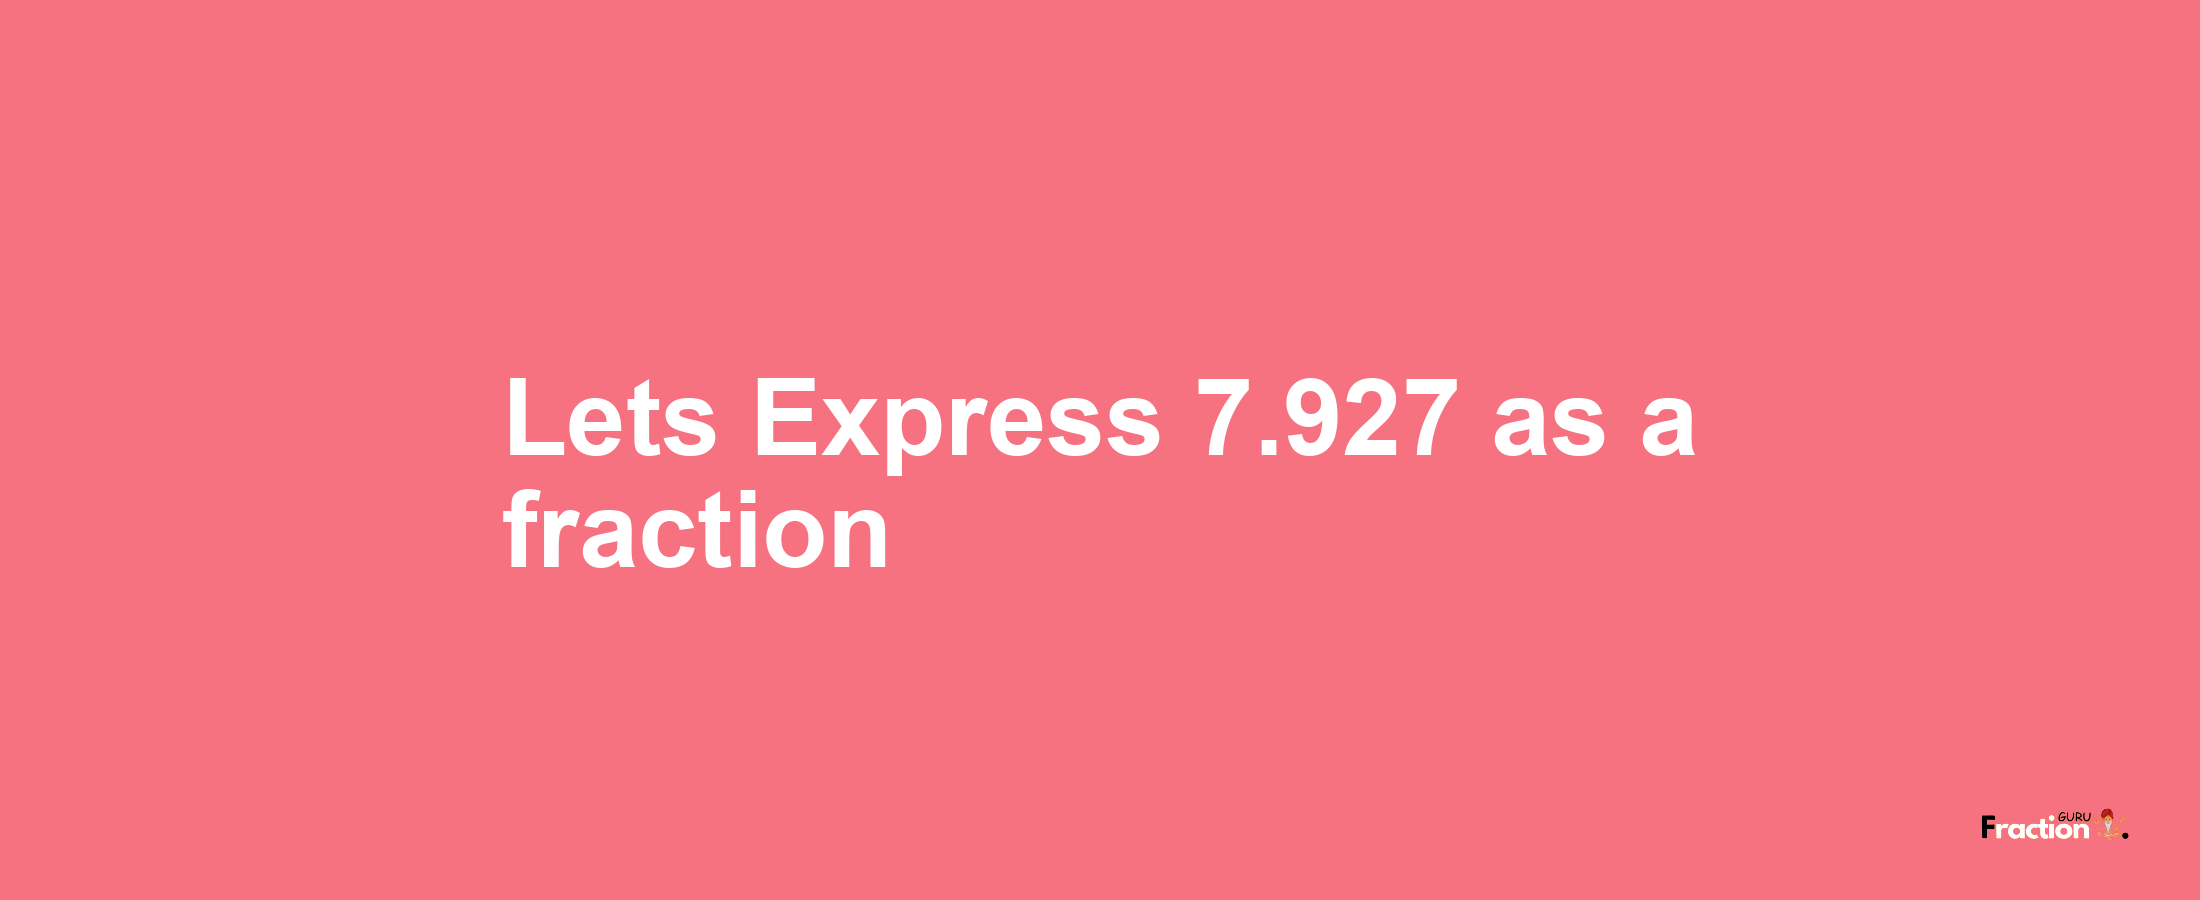 Lets Express 7.927 as afraction